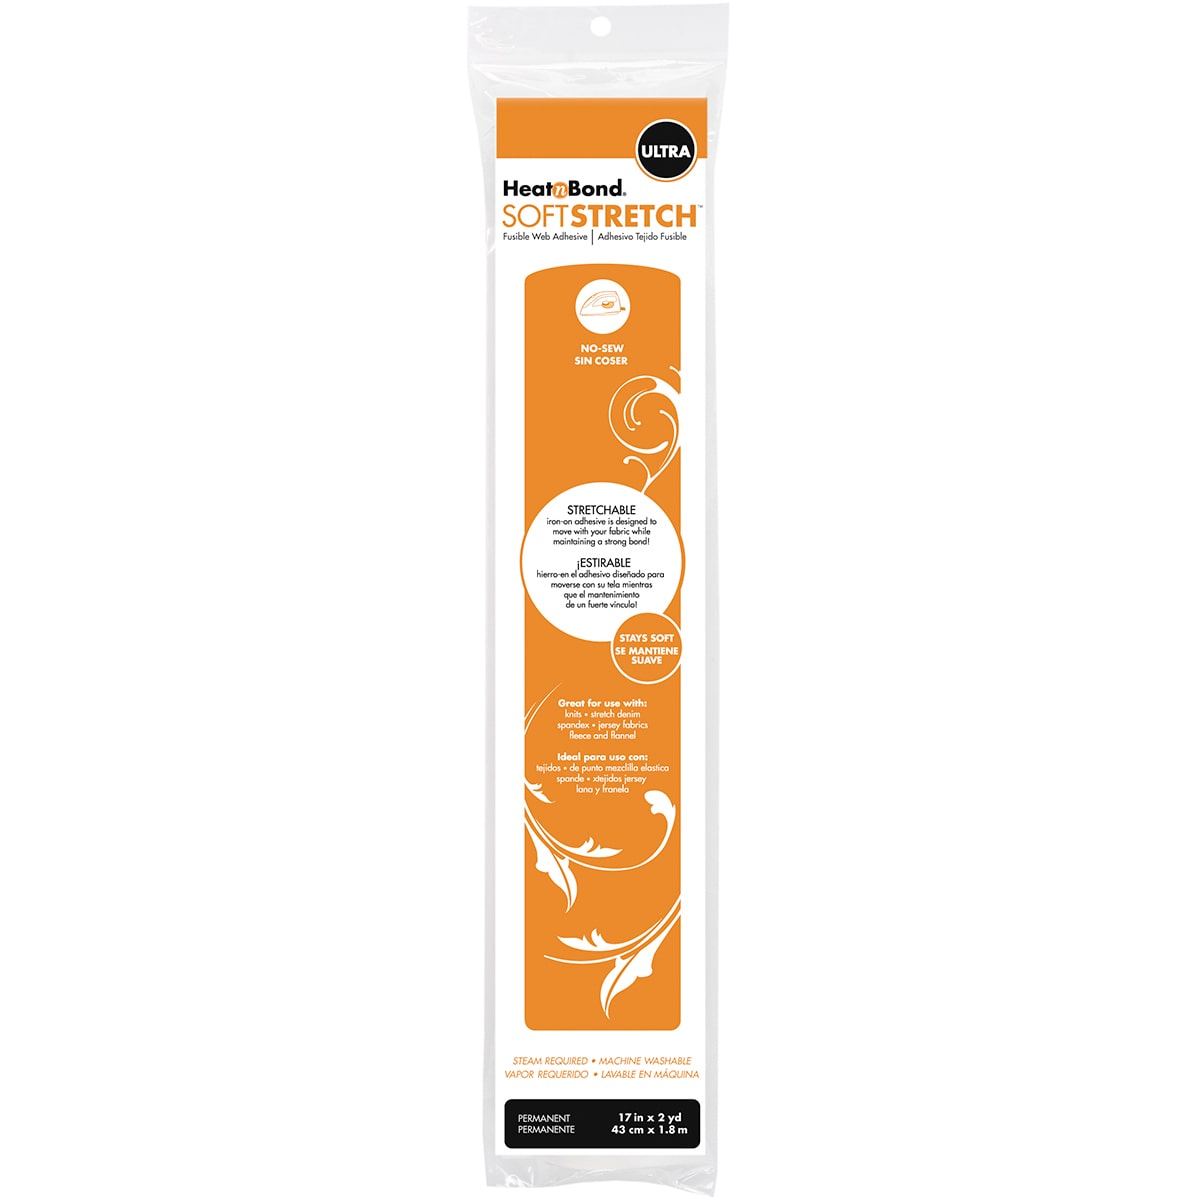 HeatnBond Soft Stretch Ultra Iron-on Fusible Web Adhesive, 17in x